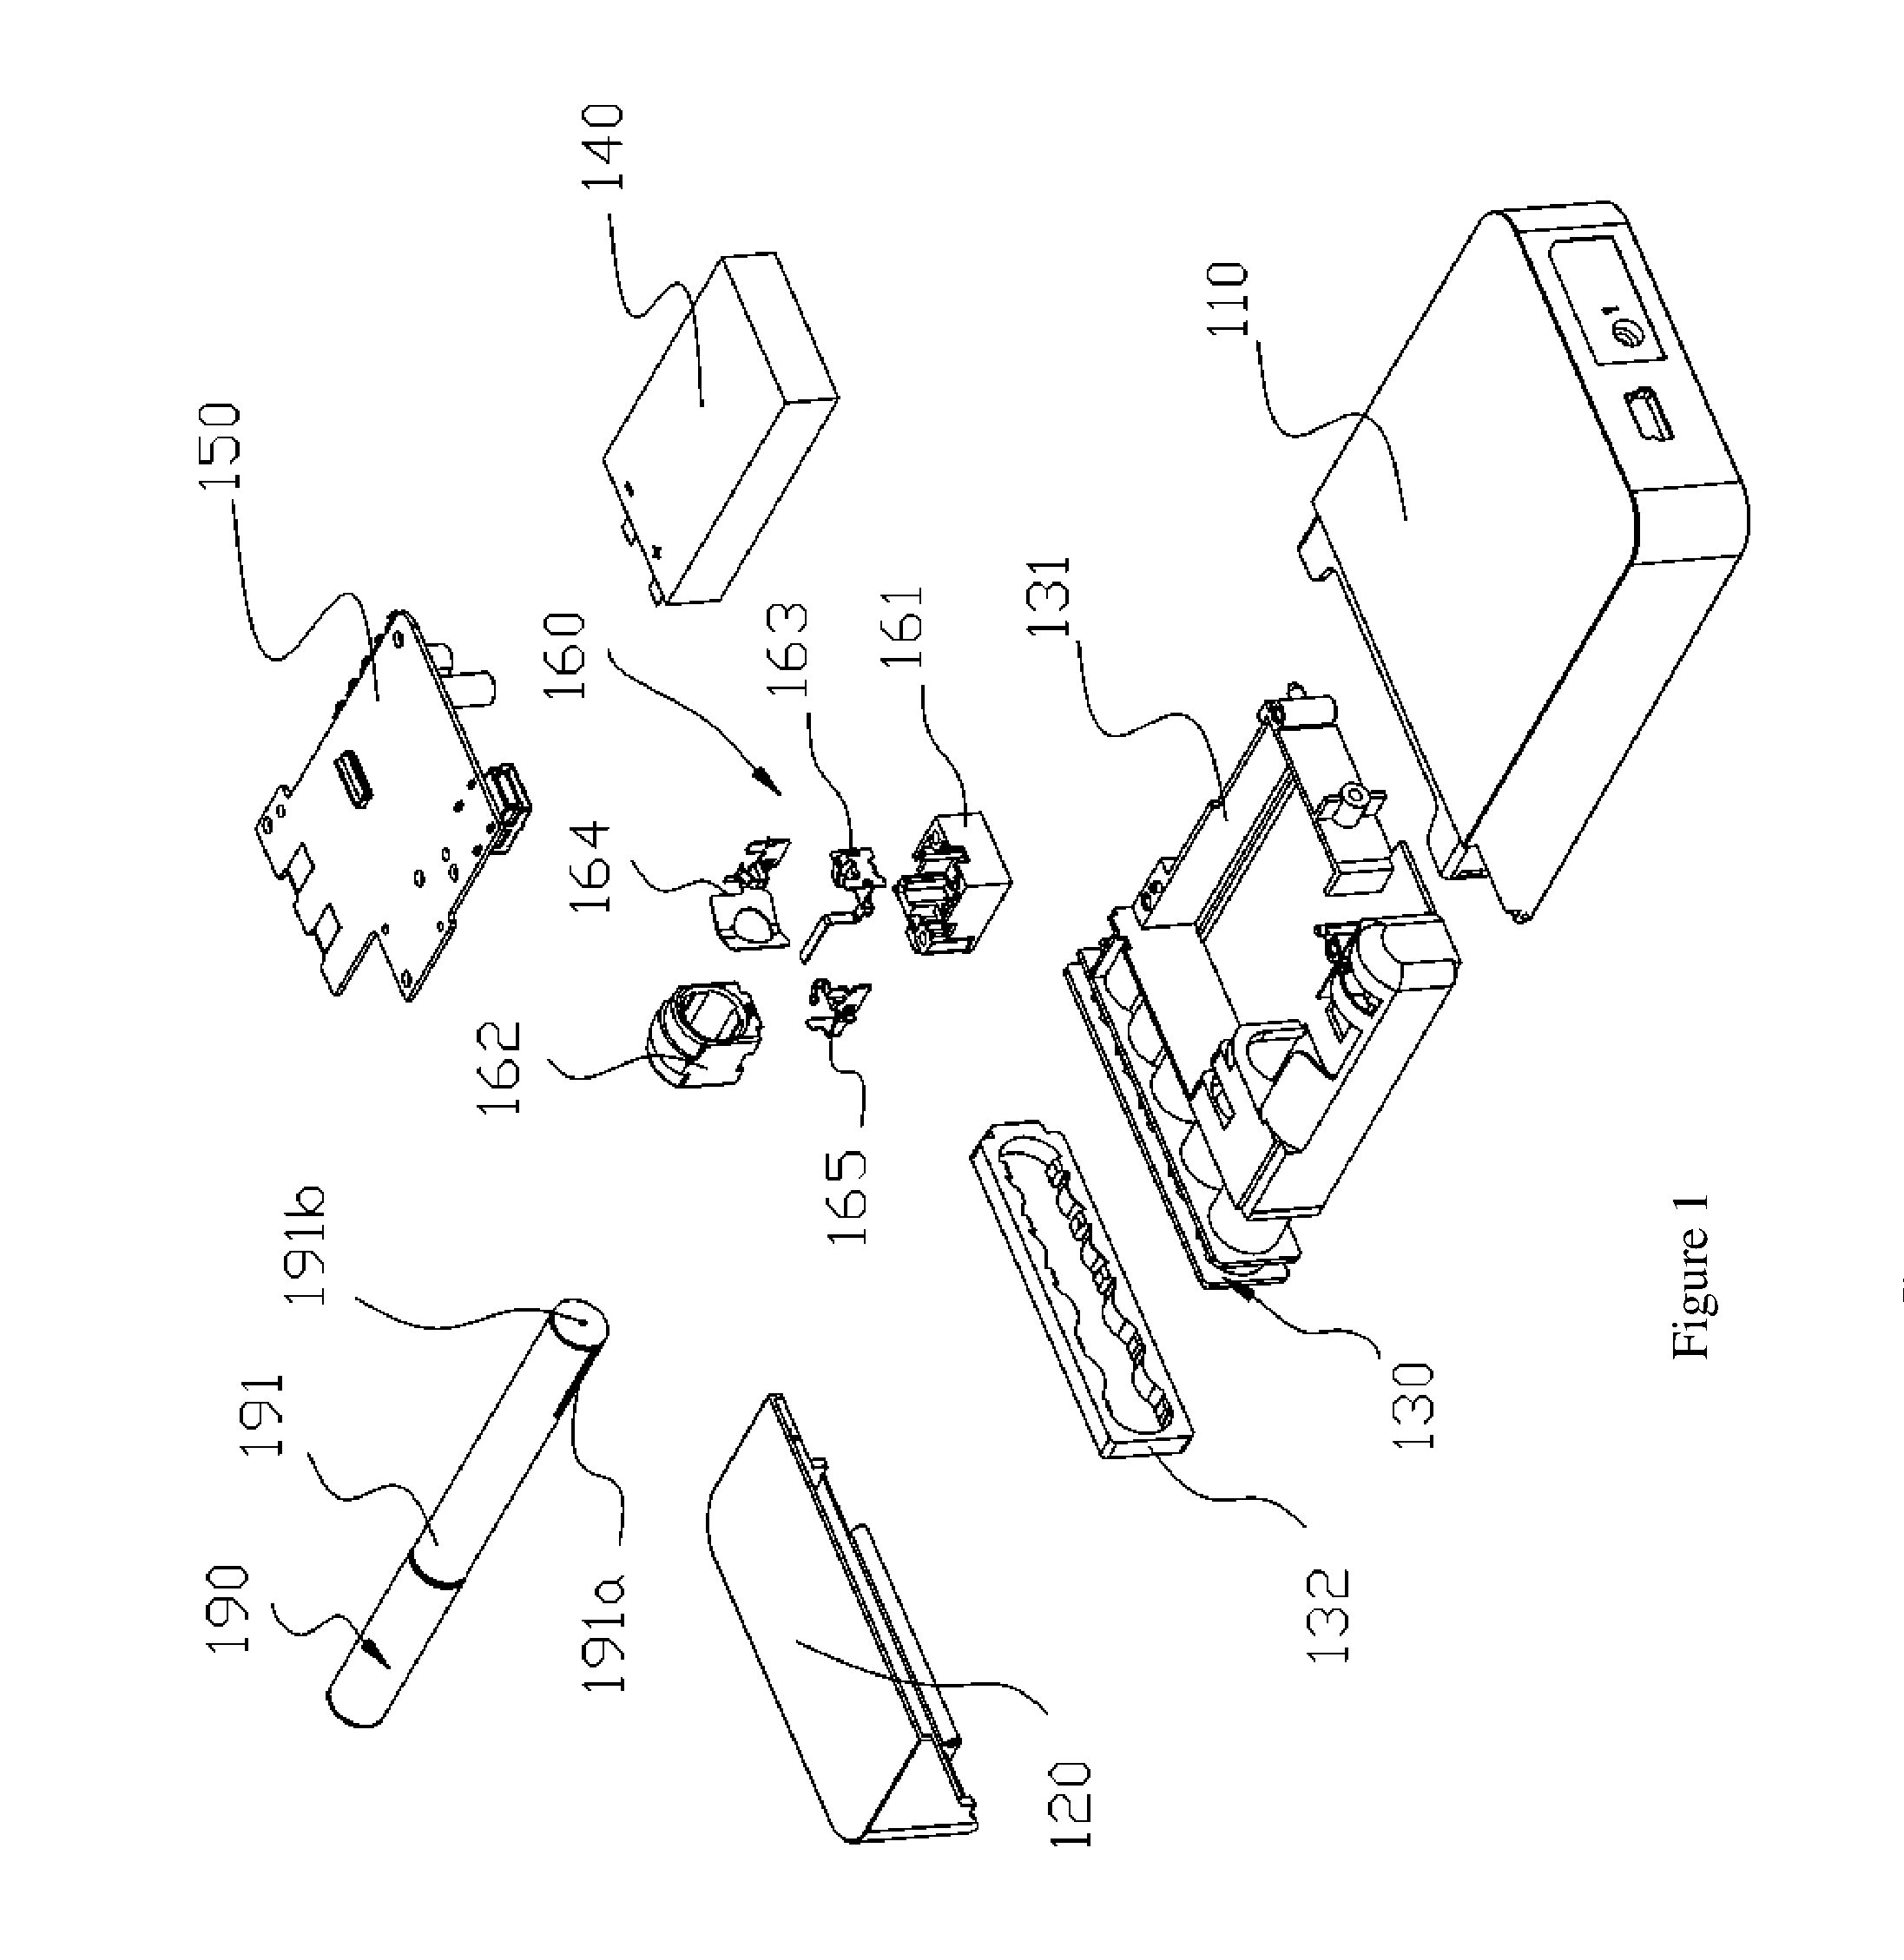 Electronic cigarette charging dock, electronic cigarette case, and method for use thereof